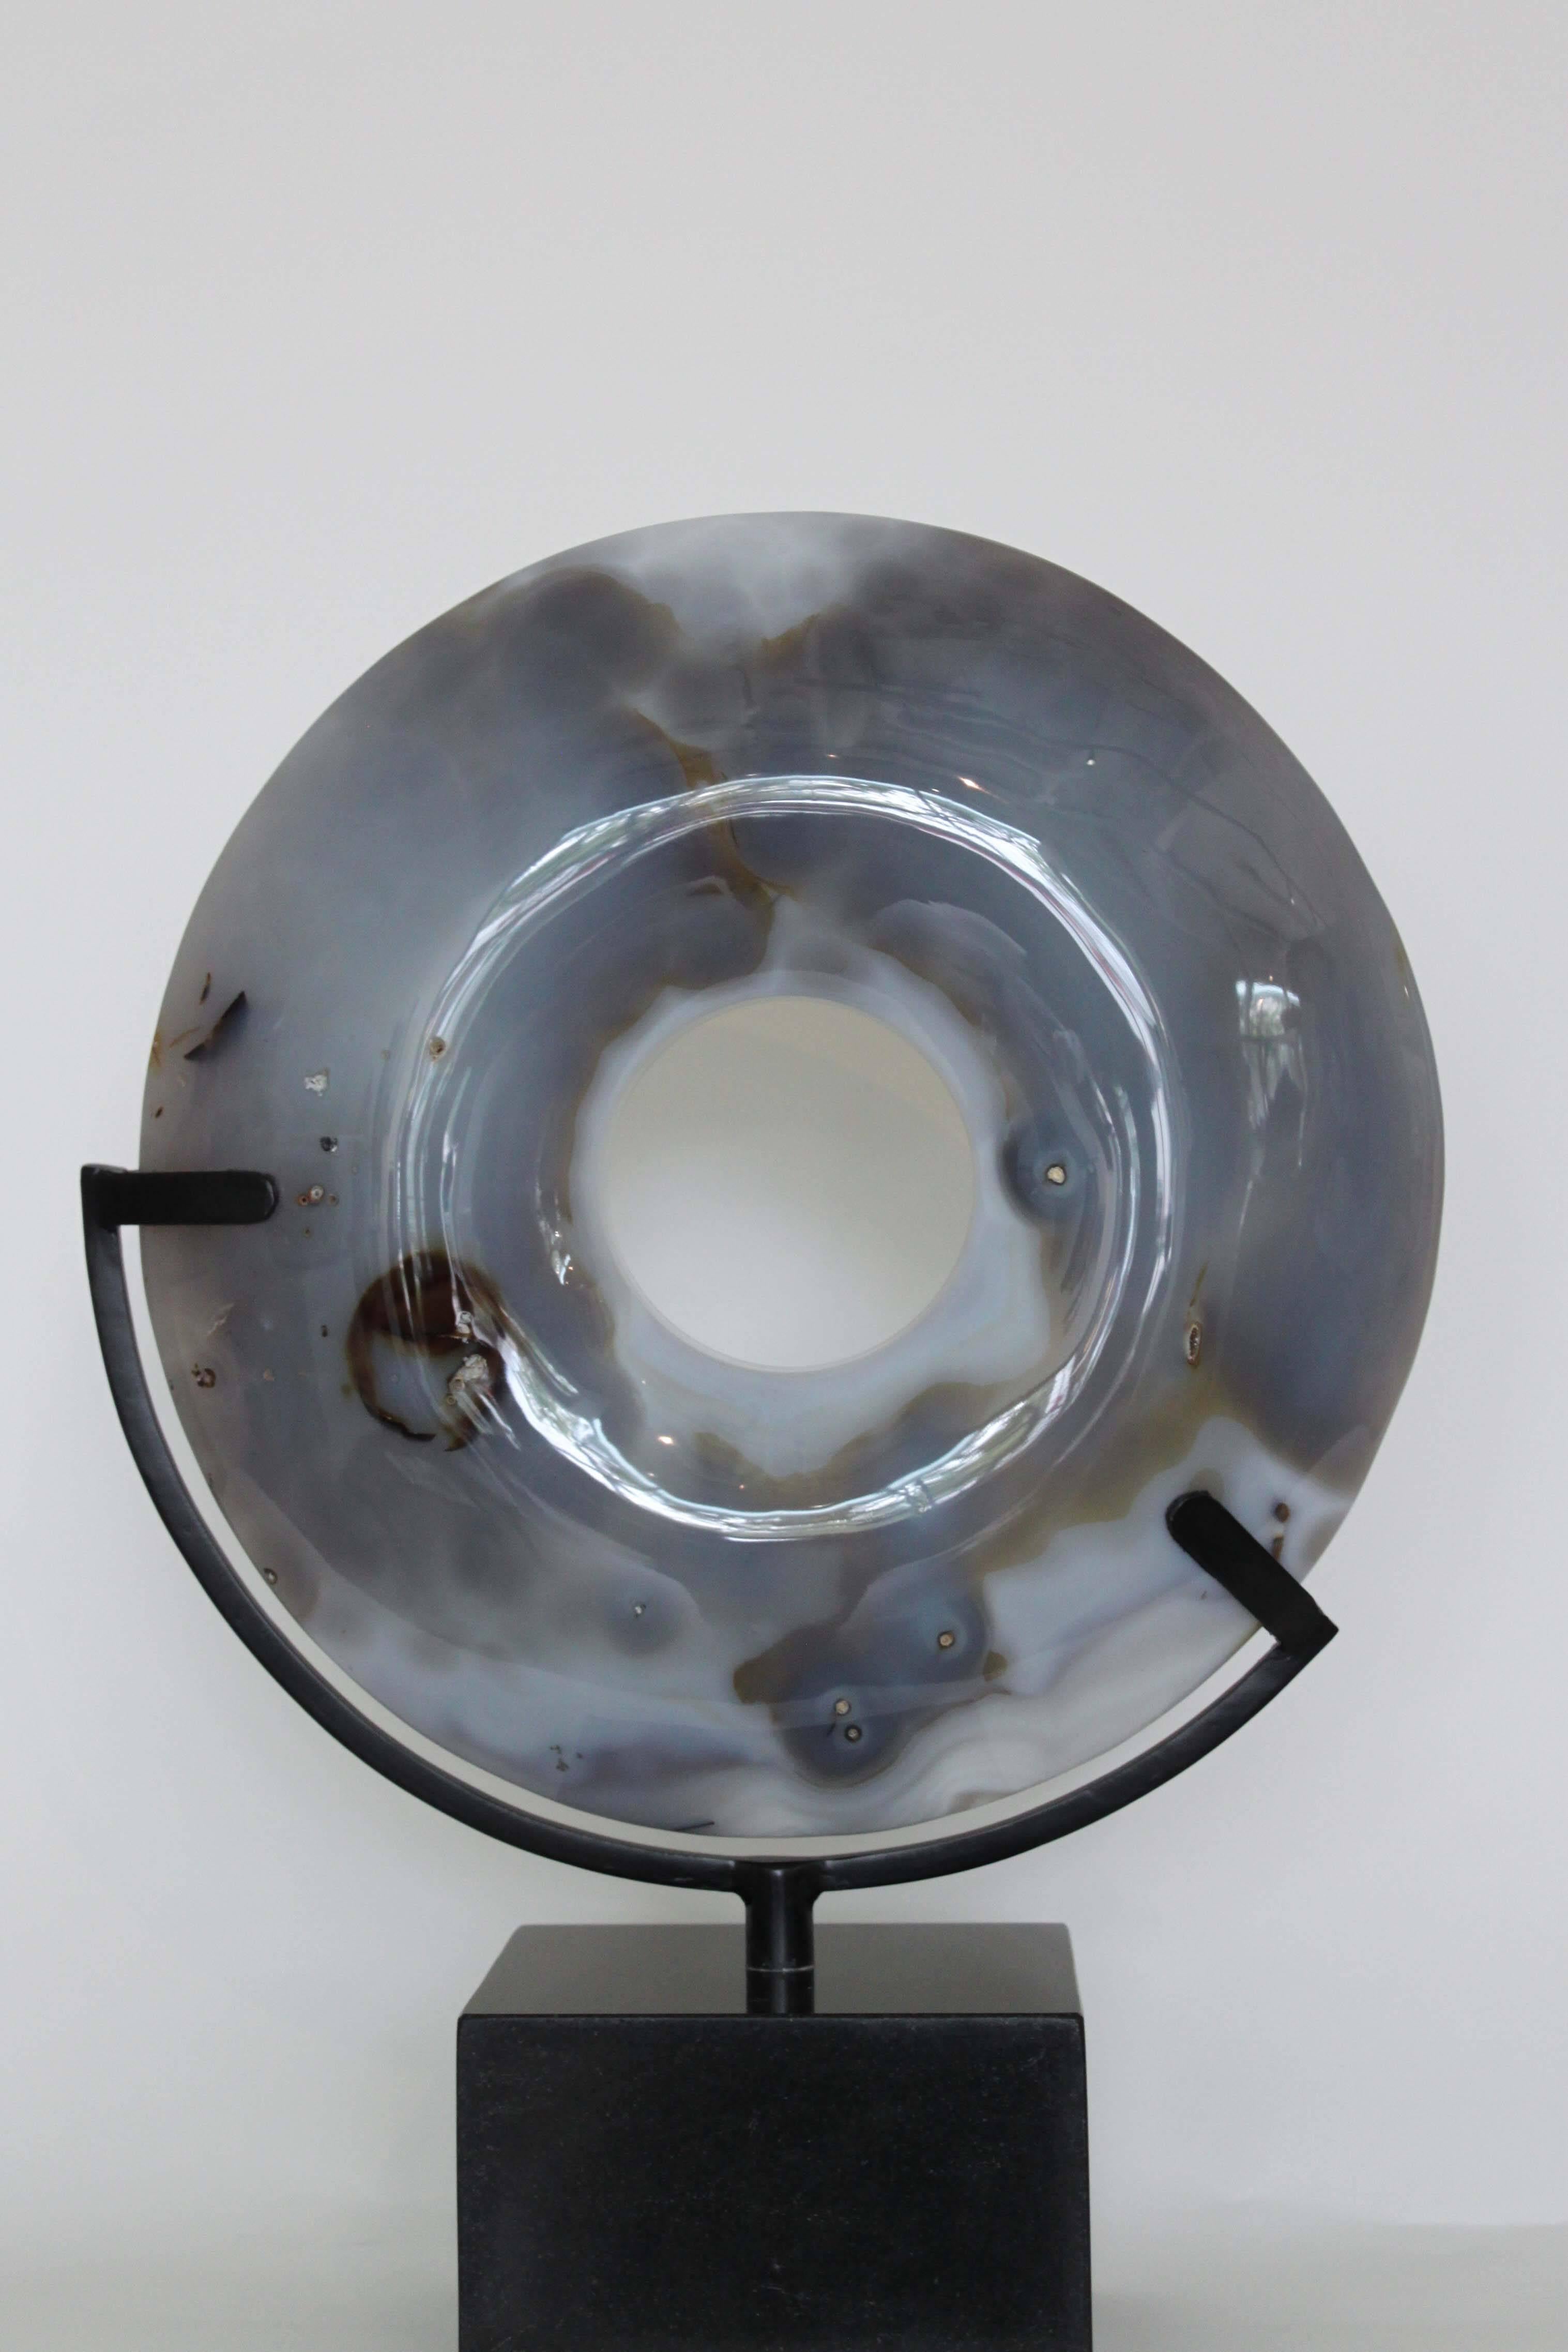 A beautiful handcrafted disc made of agate from Madagascar. Set atop a custom granite base.